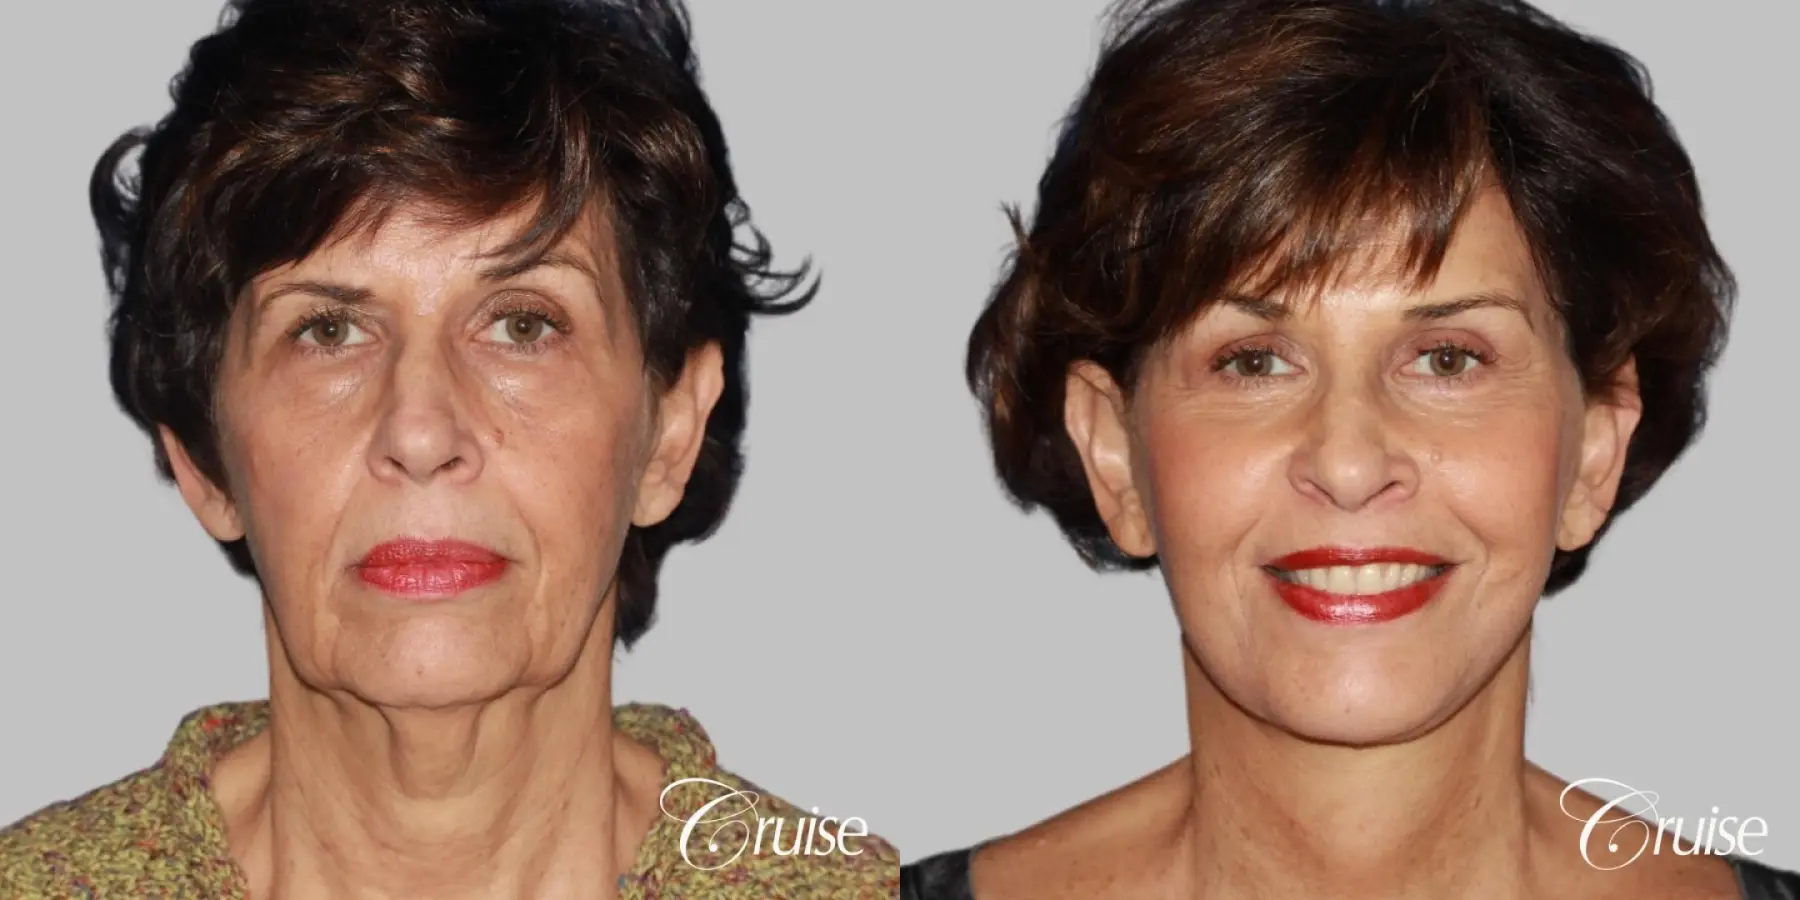 facelift surgery dr. cruise - Before and After